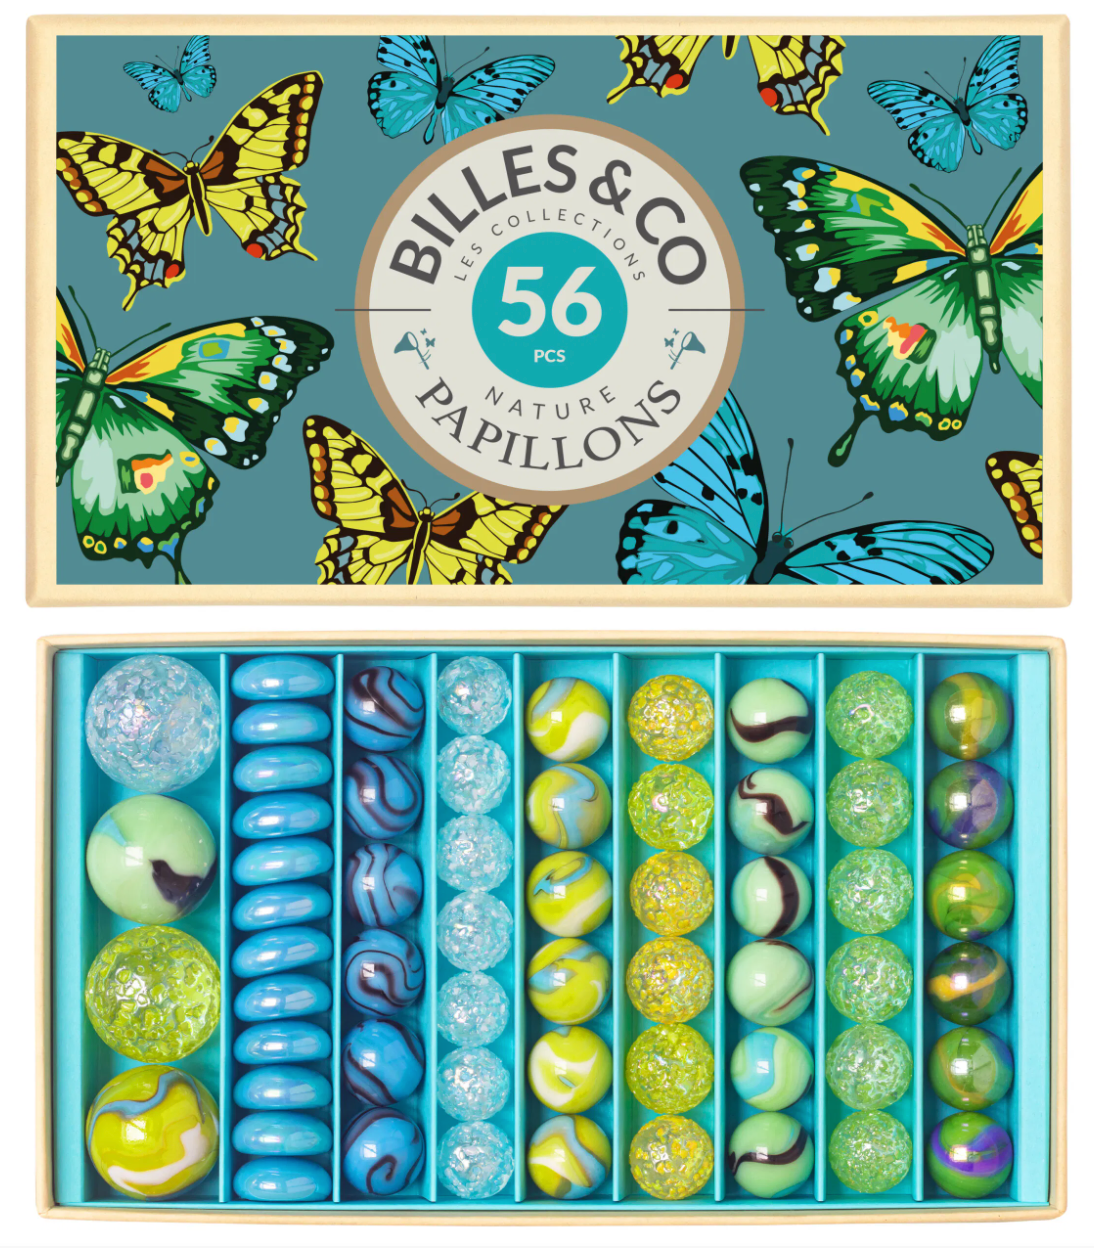 Billes & Co Butterfly Box (56 pieces)